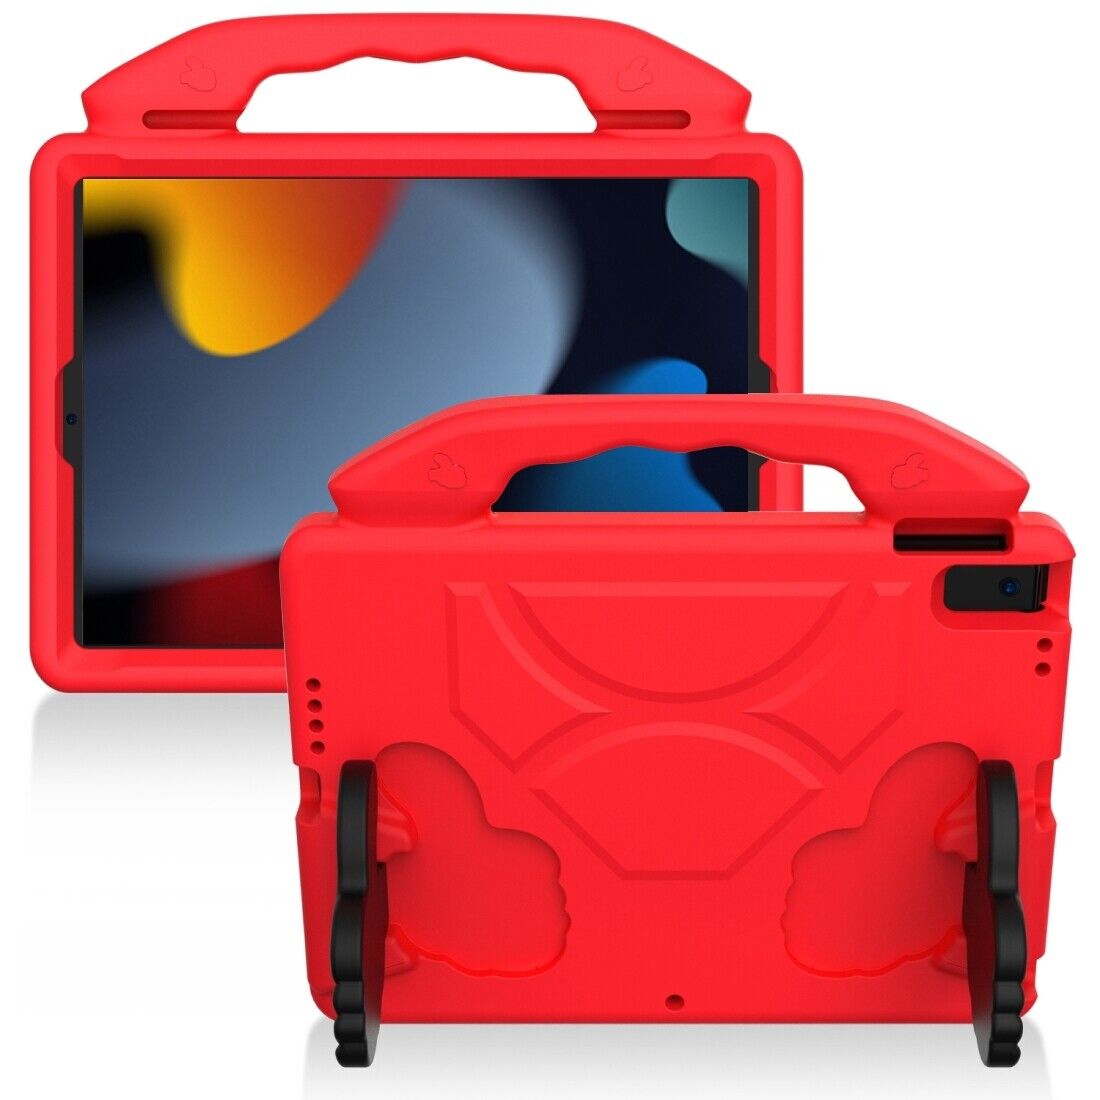 For Apple iPad 10.2 8th Gen 2020 Kids Friendly Case Shockproof Cover With Thumbs Up - Red